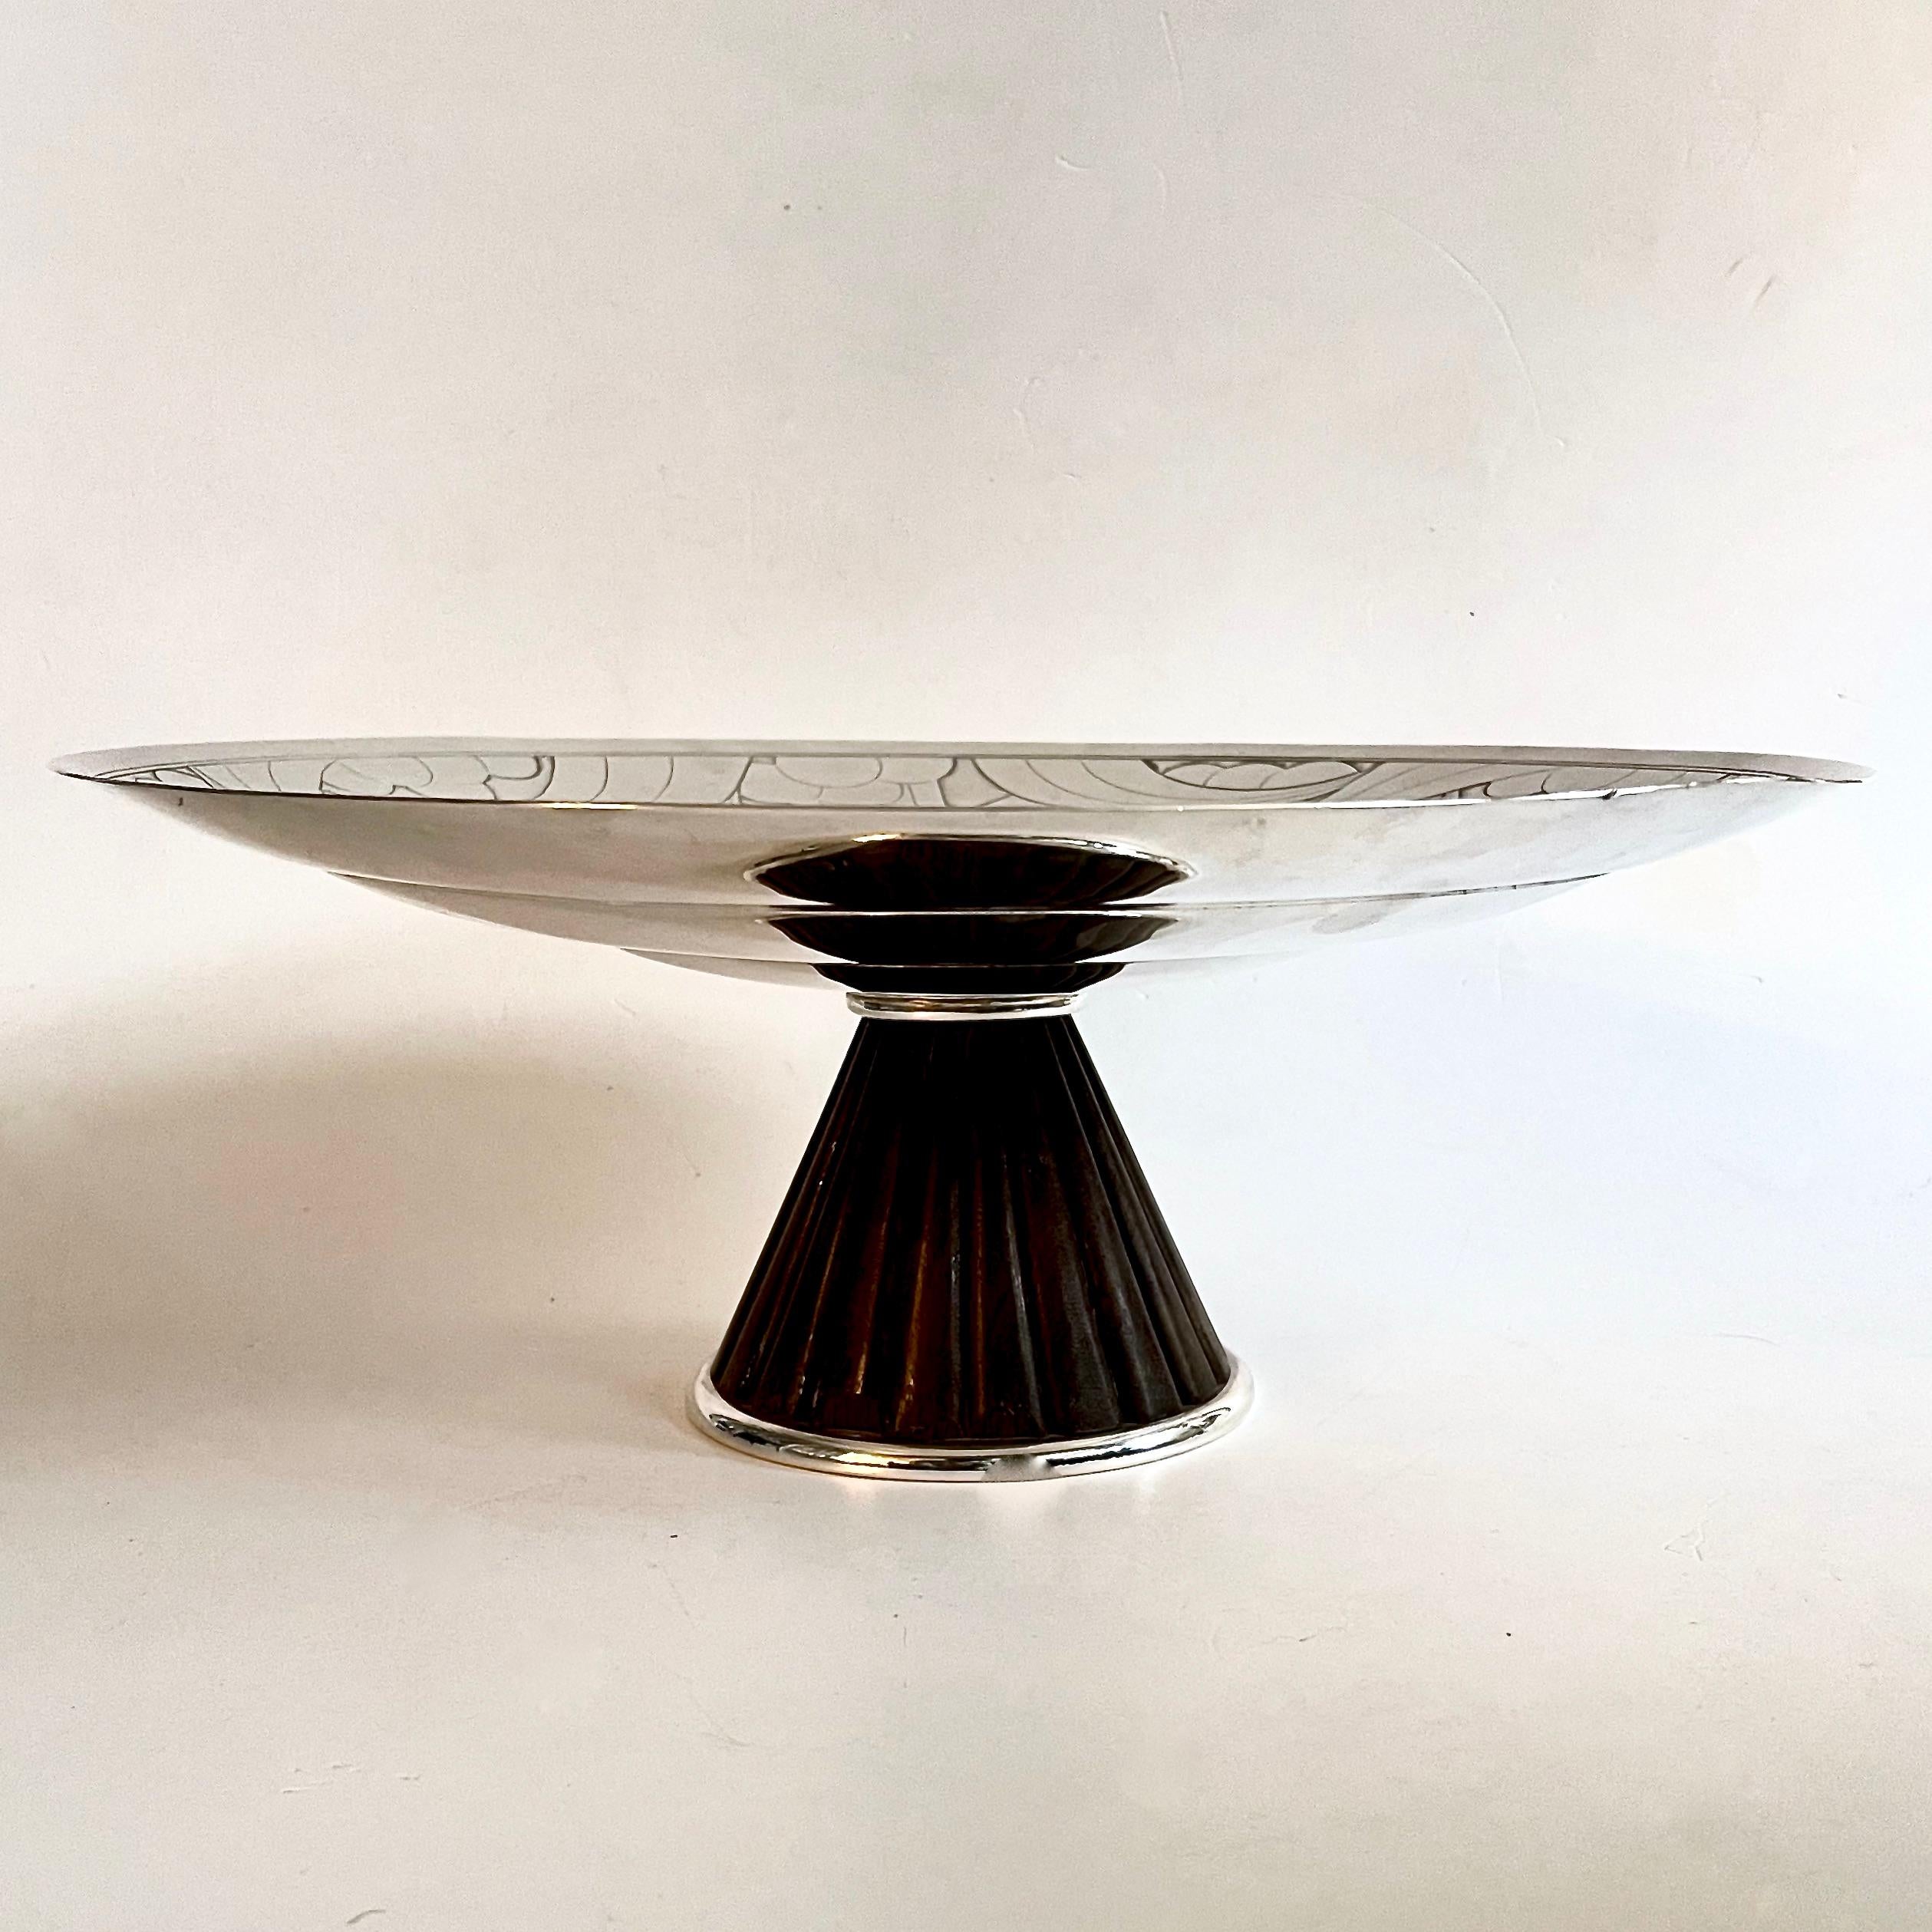 A beautiful large Art Deco silver plated  pedestal bowl. A three tiered concave bowl sits on a cone base of moulded ribbed wood finished with a silver plated surround.  The interior of the bowl is decorated with a geometric abstract pattern of